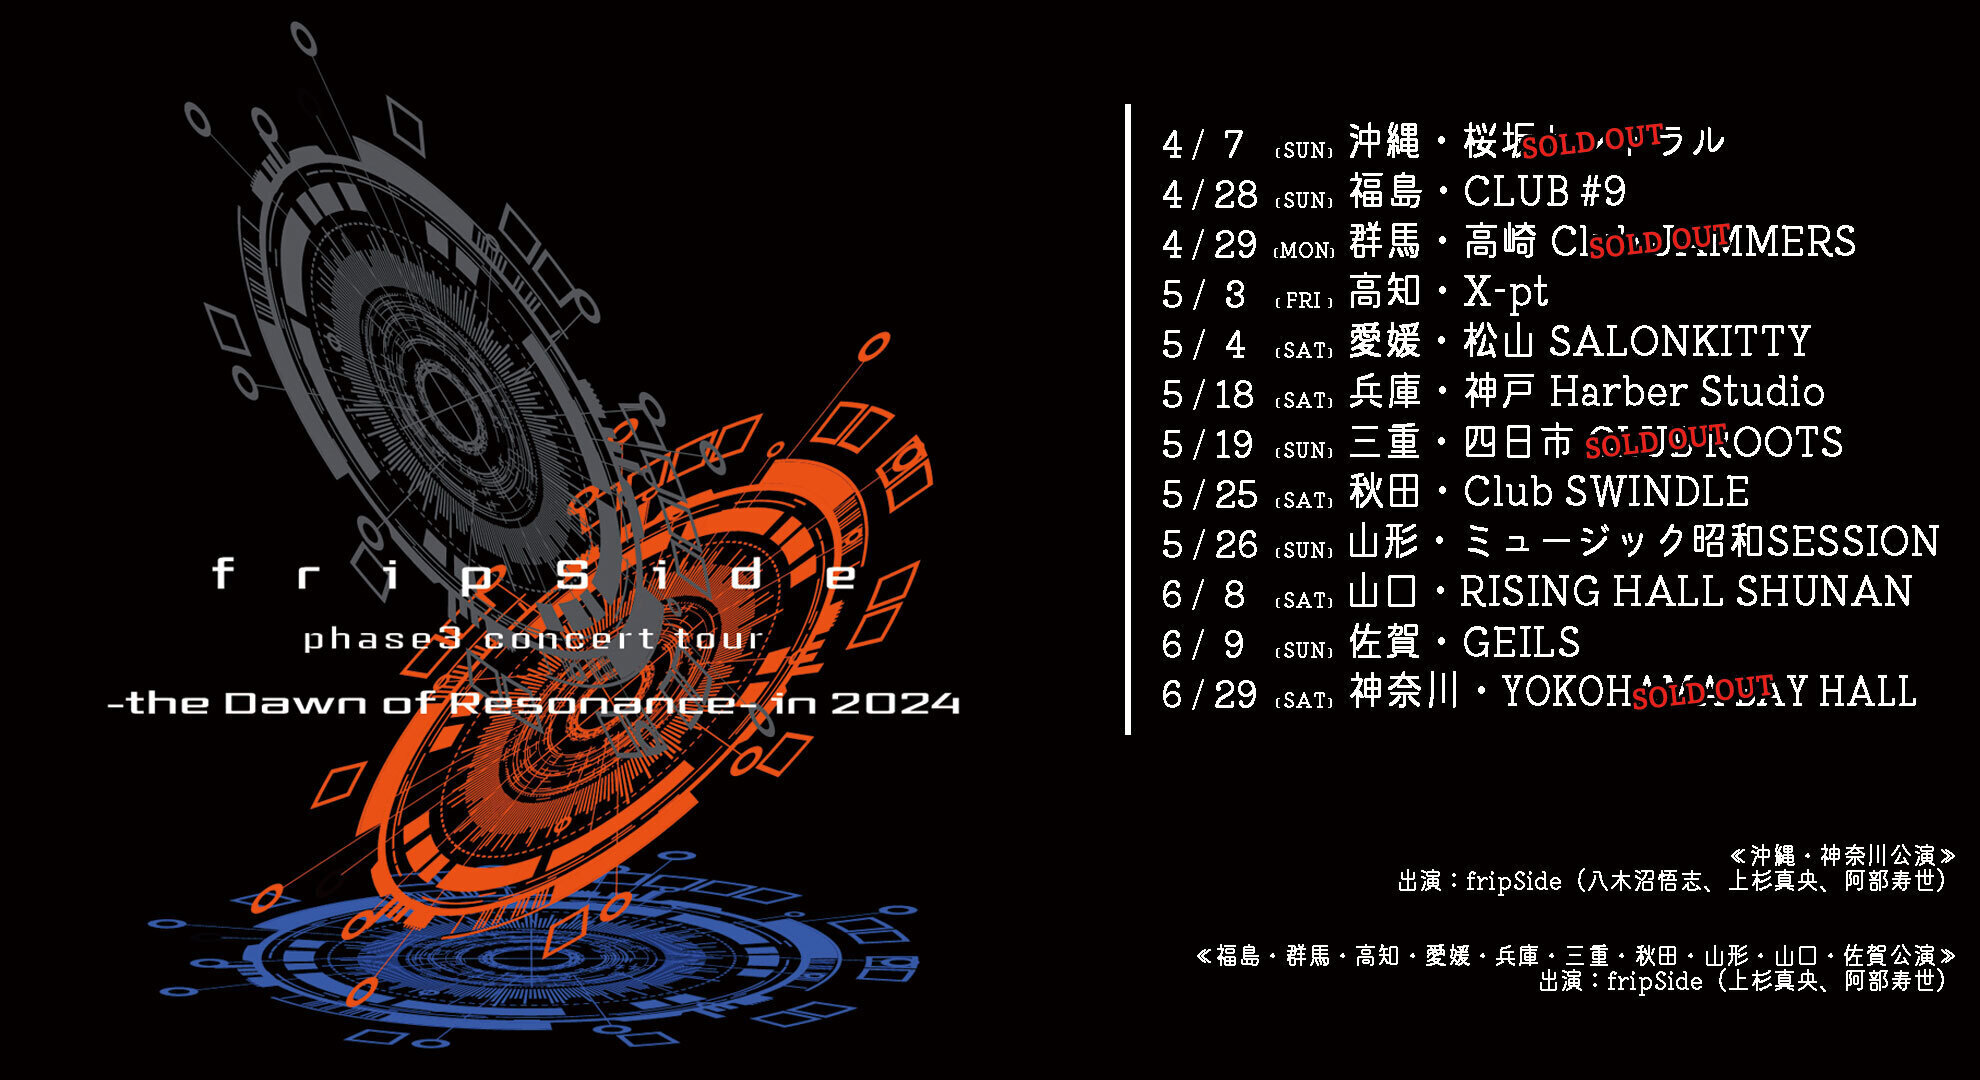 fripSide phase3 concert tour -the Dawn of Resonance- in 2024 